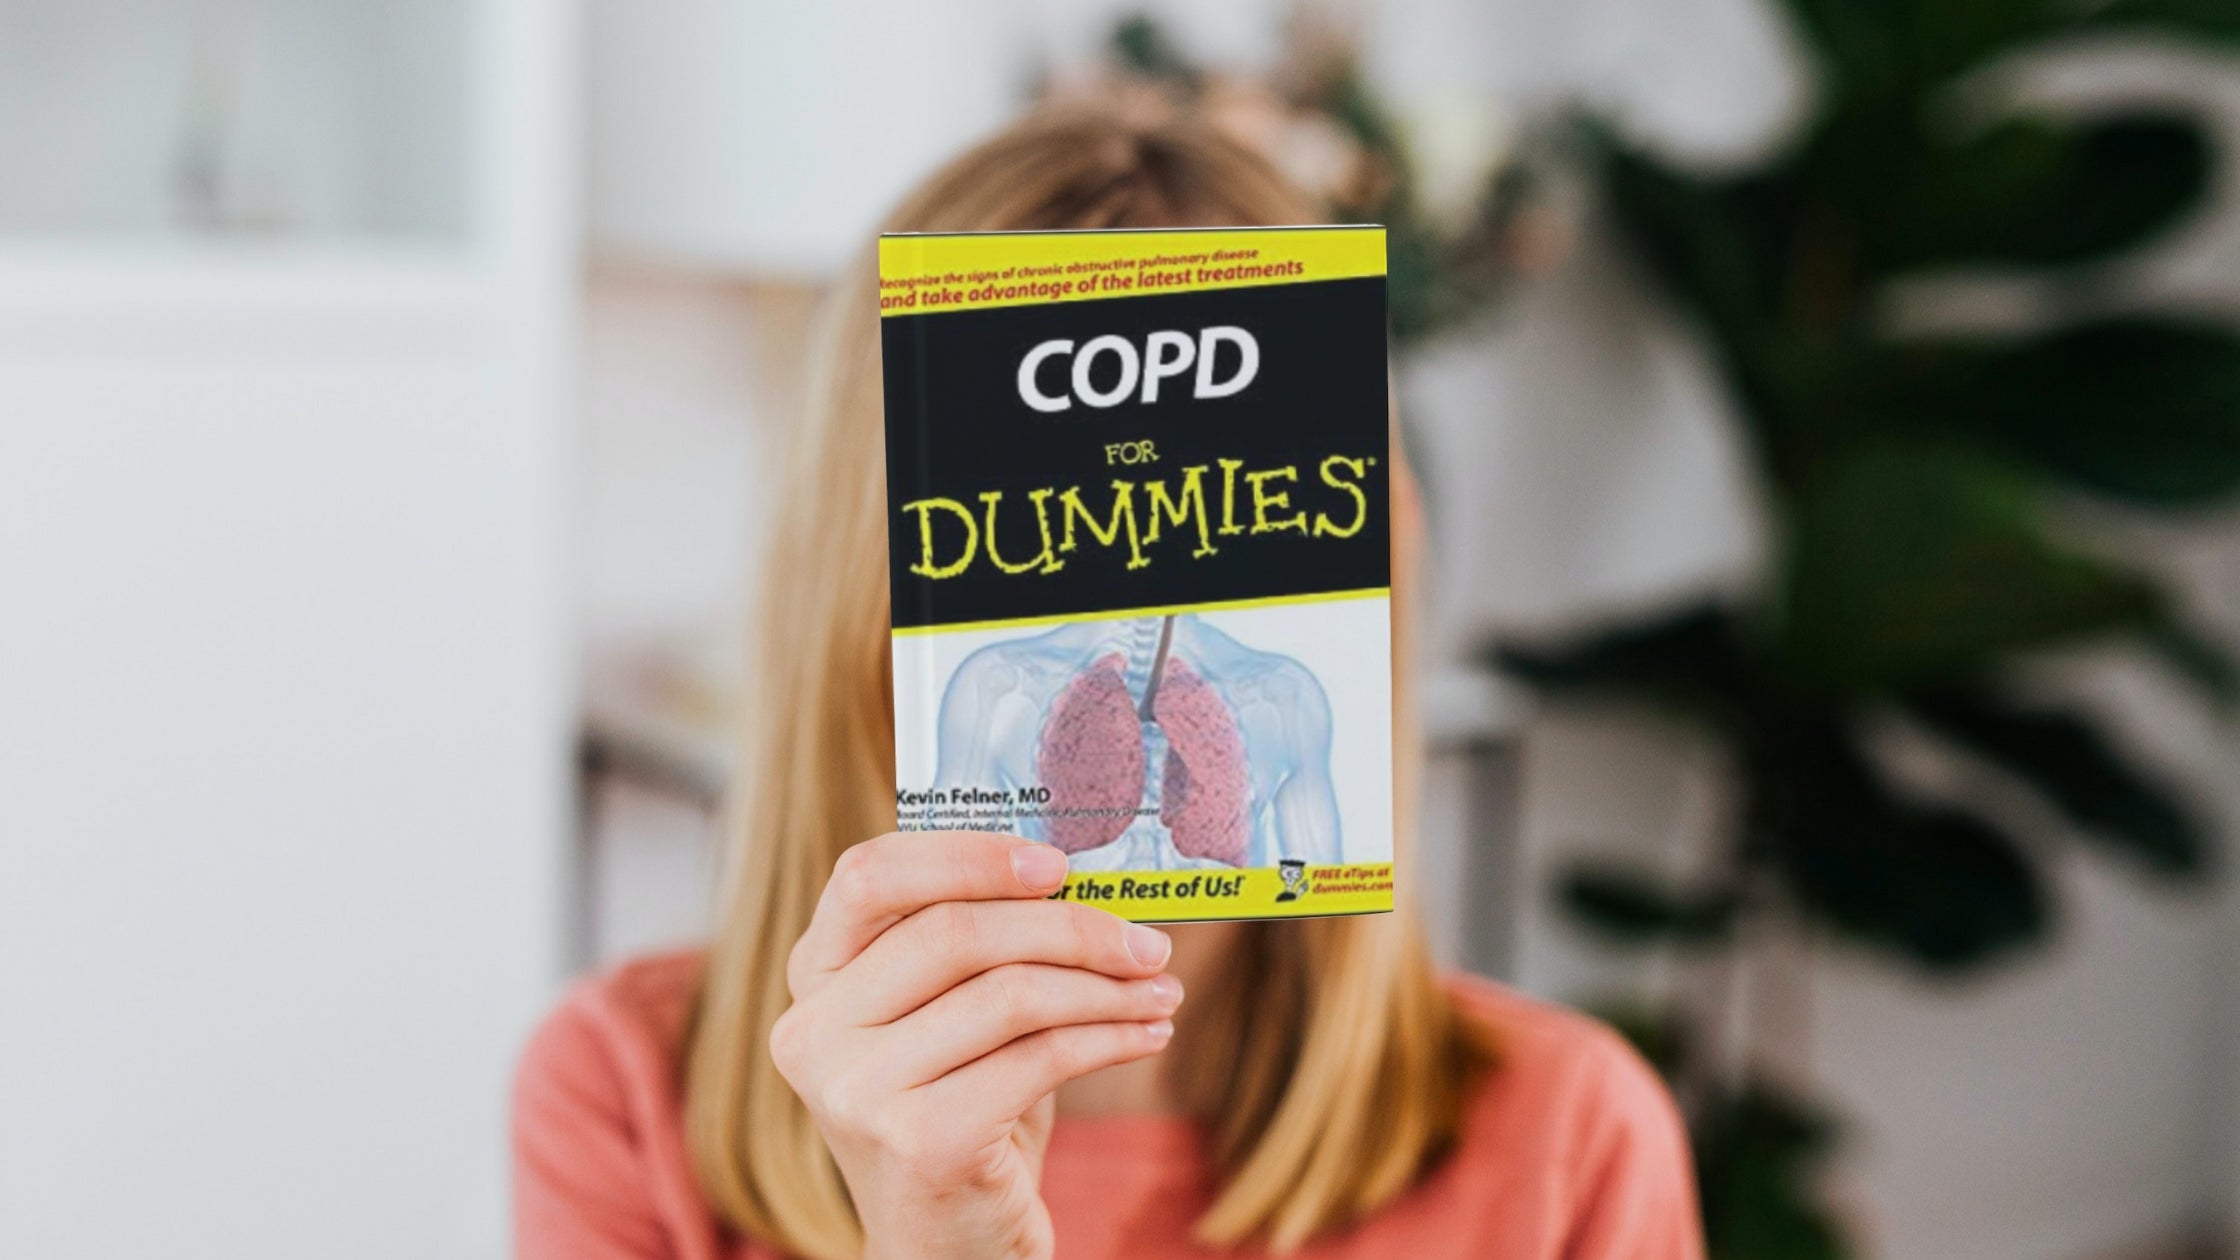 gift for people with COPD - COPD for dummies book